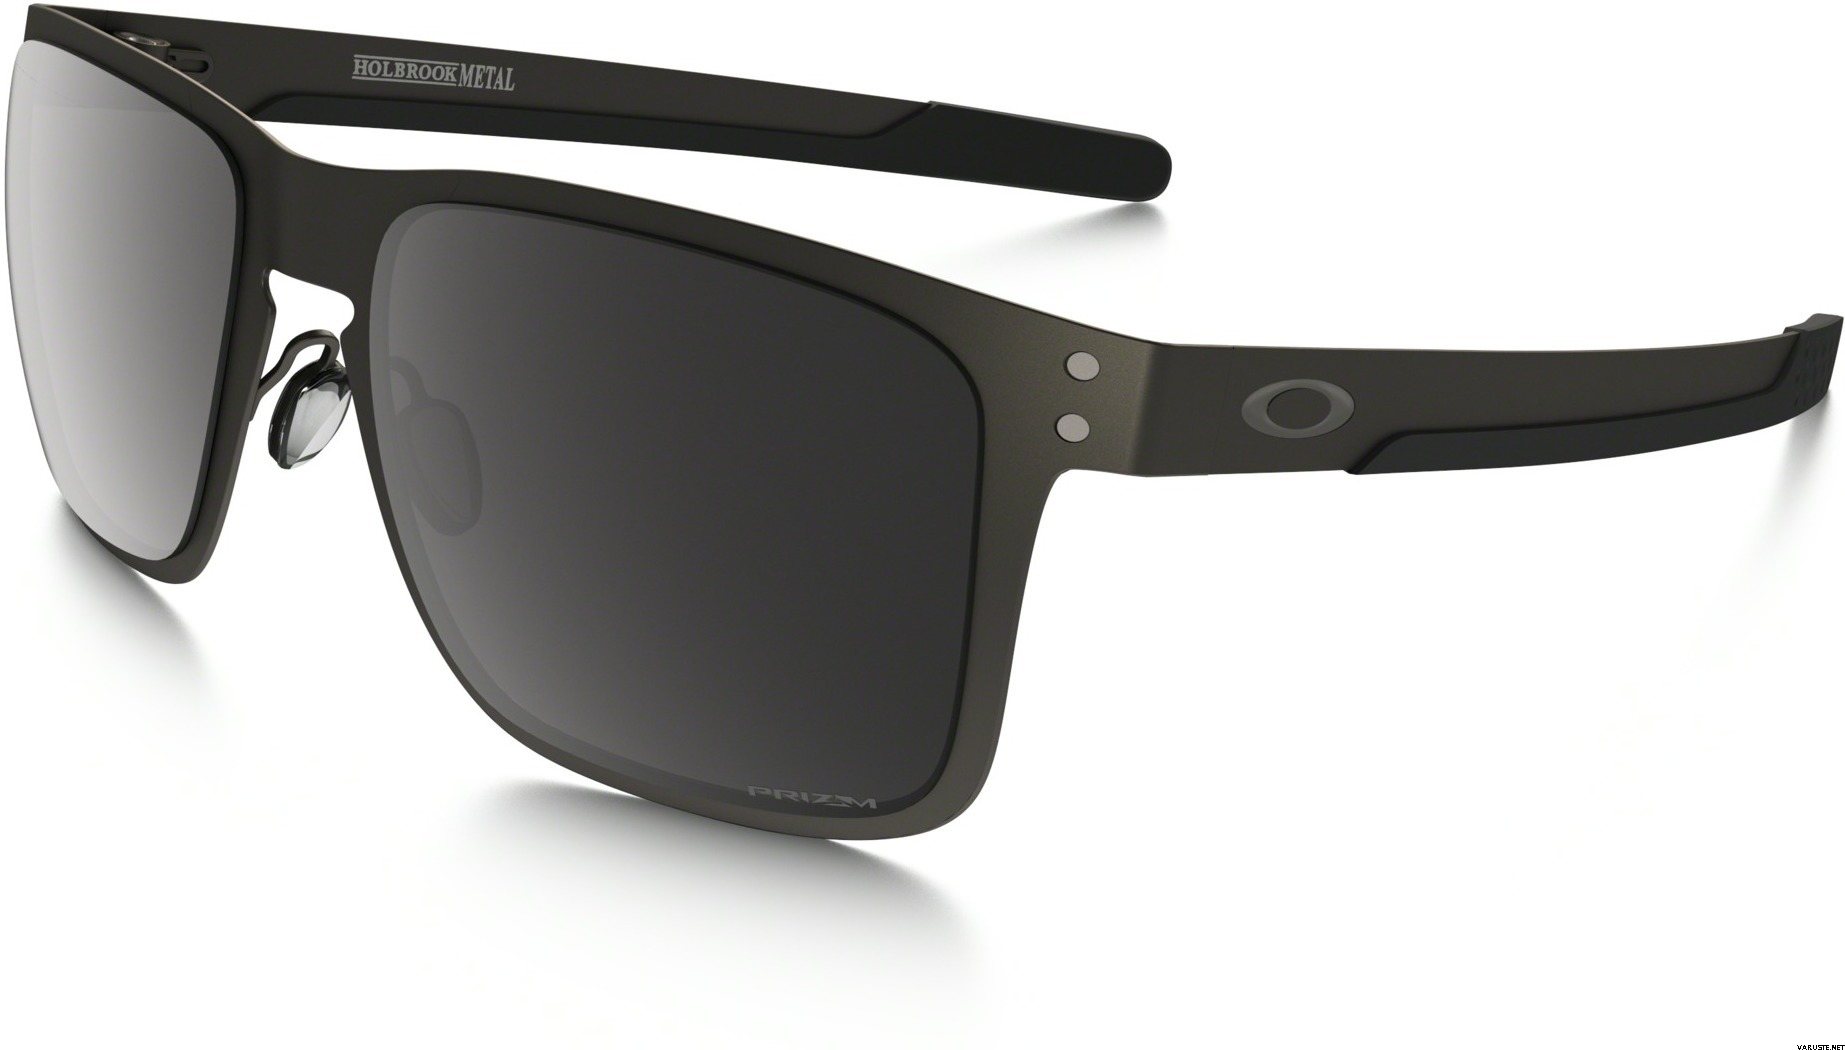 oakley with metal frame